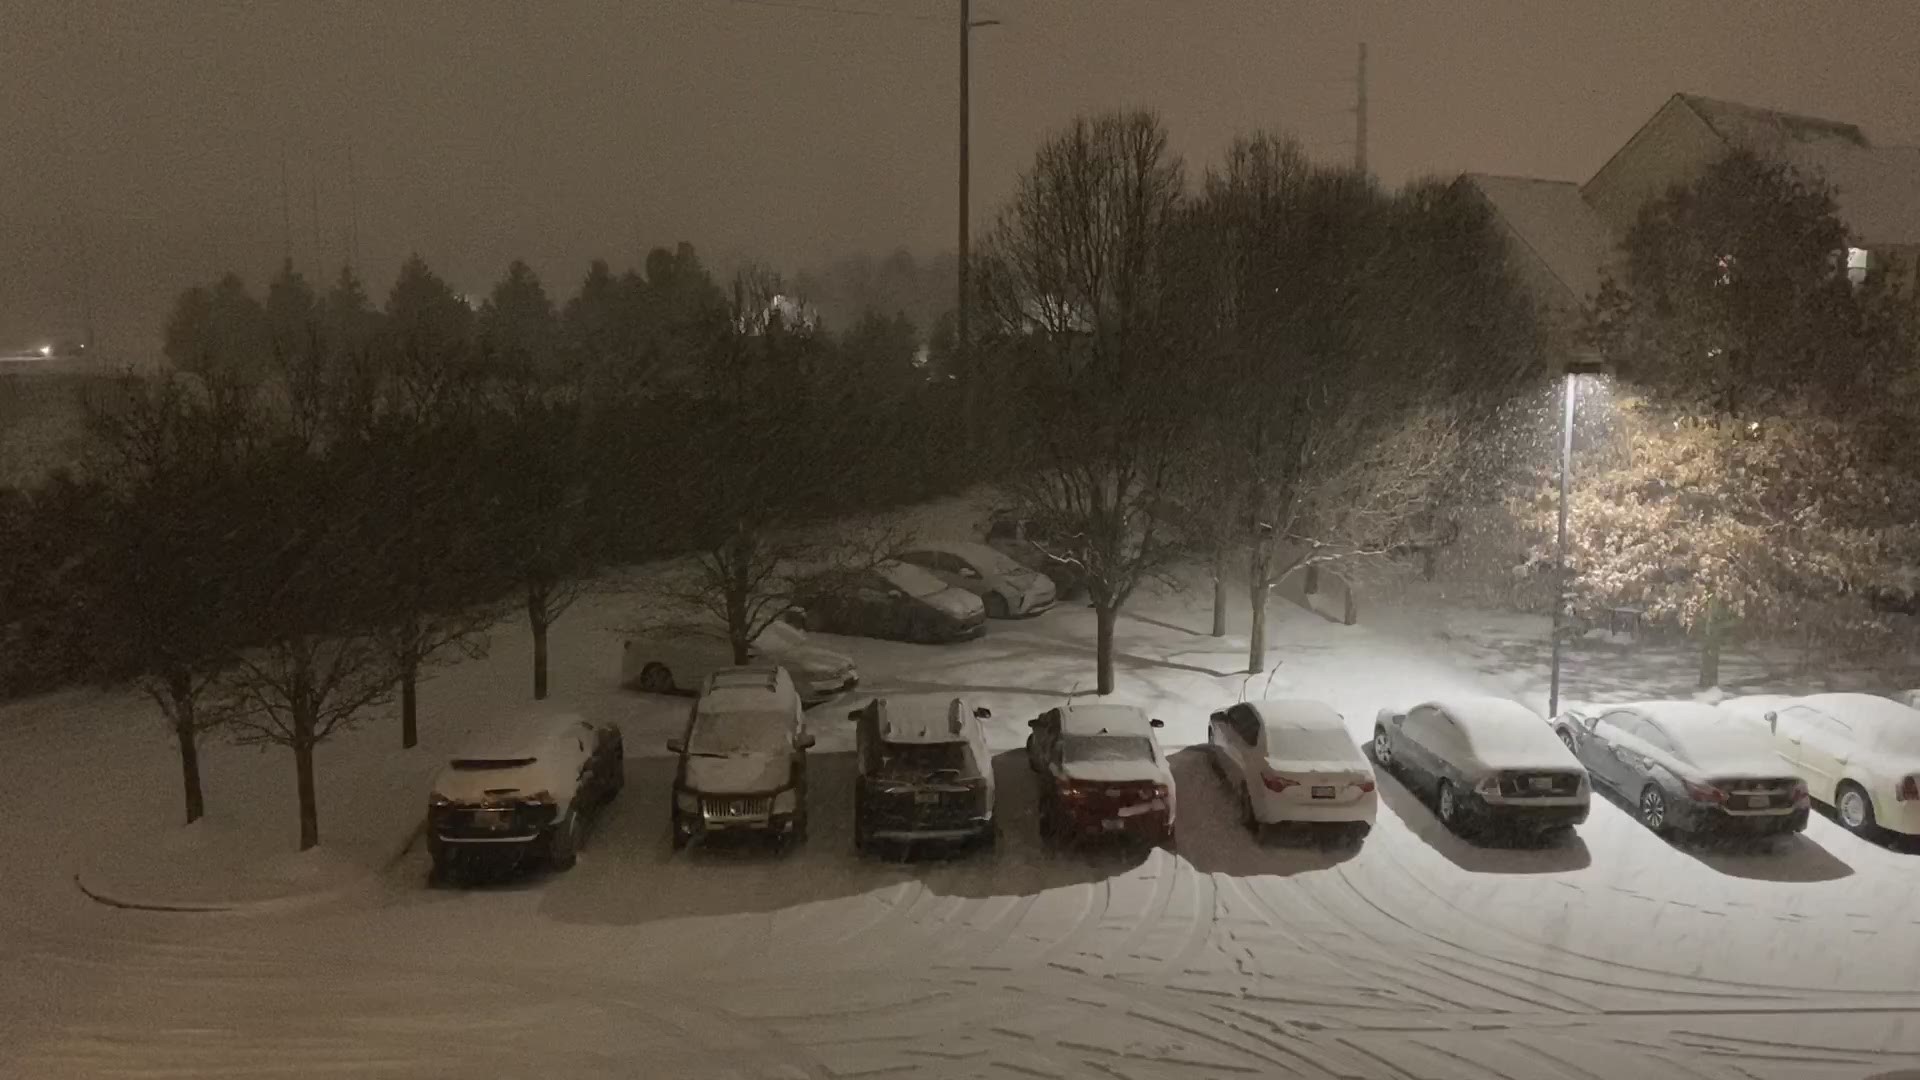 13News photojournalist Frank Young sent in video of the snow going strong on the southeast side of Indianapolis.